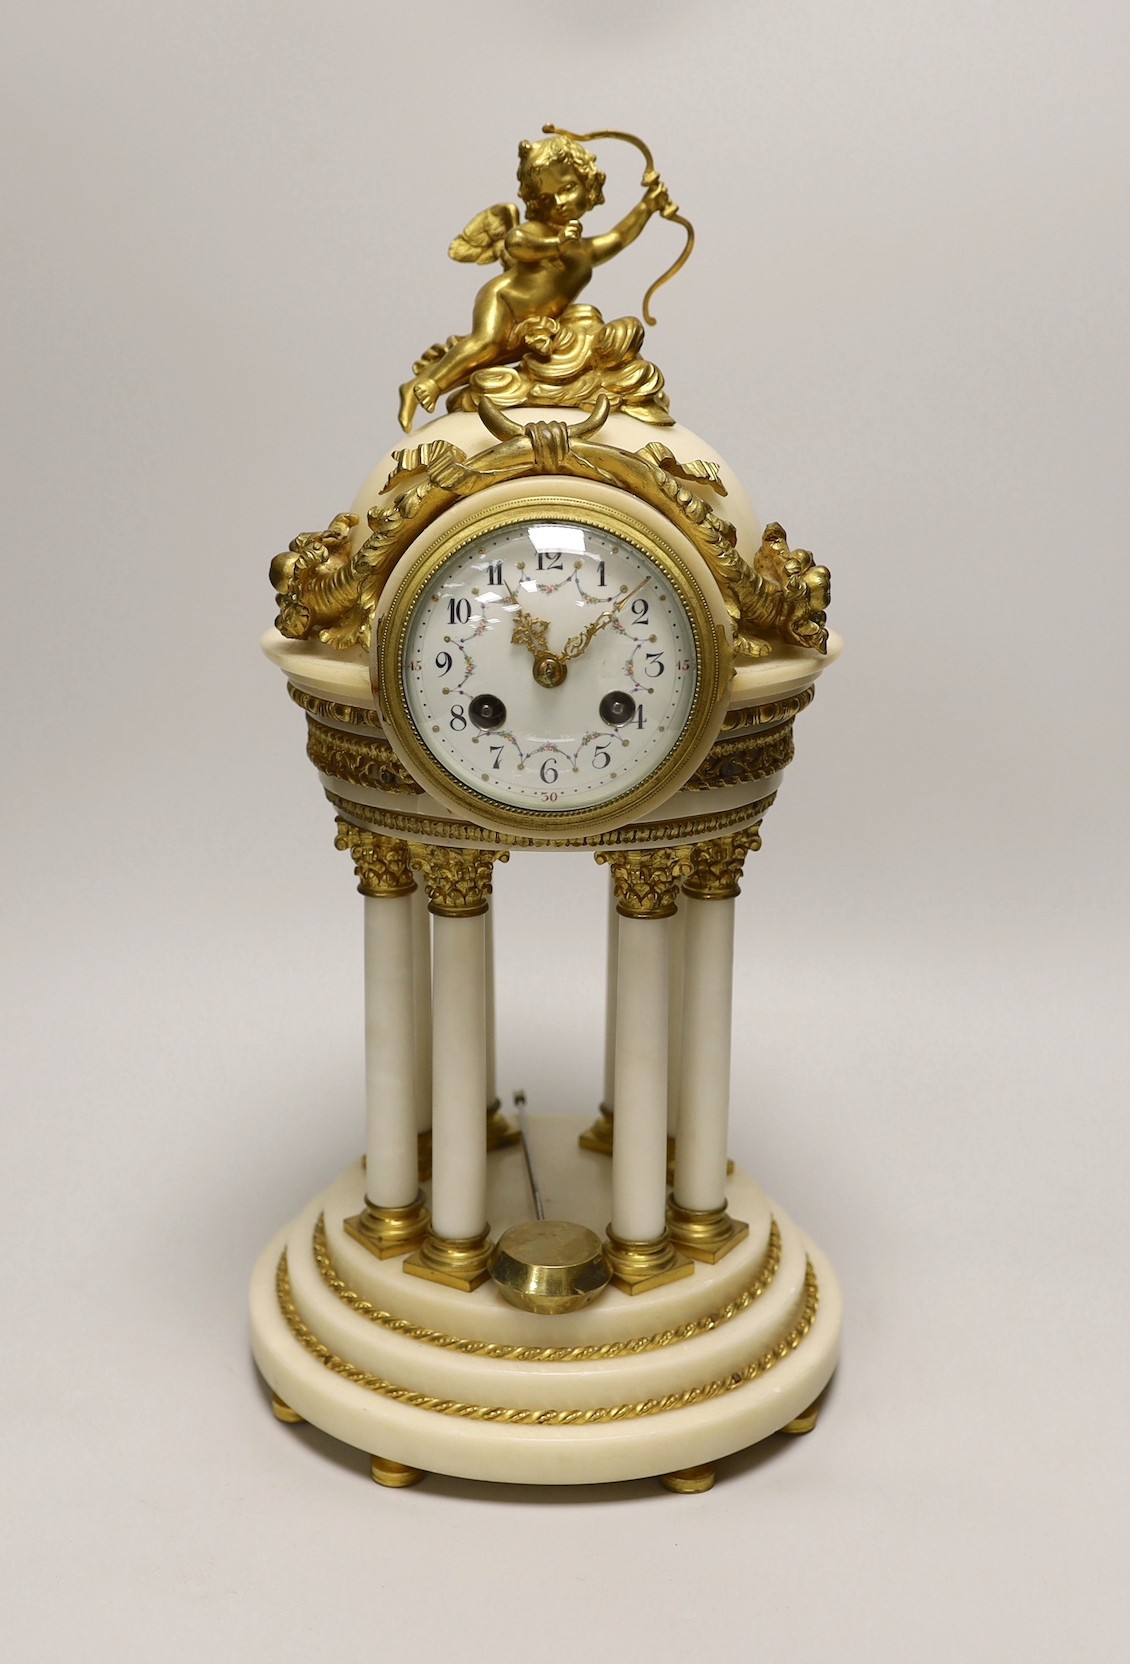 An early 20th century French alabaster and ormolu mantel ‘cupola’ clock with pendulum, 39cm tall